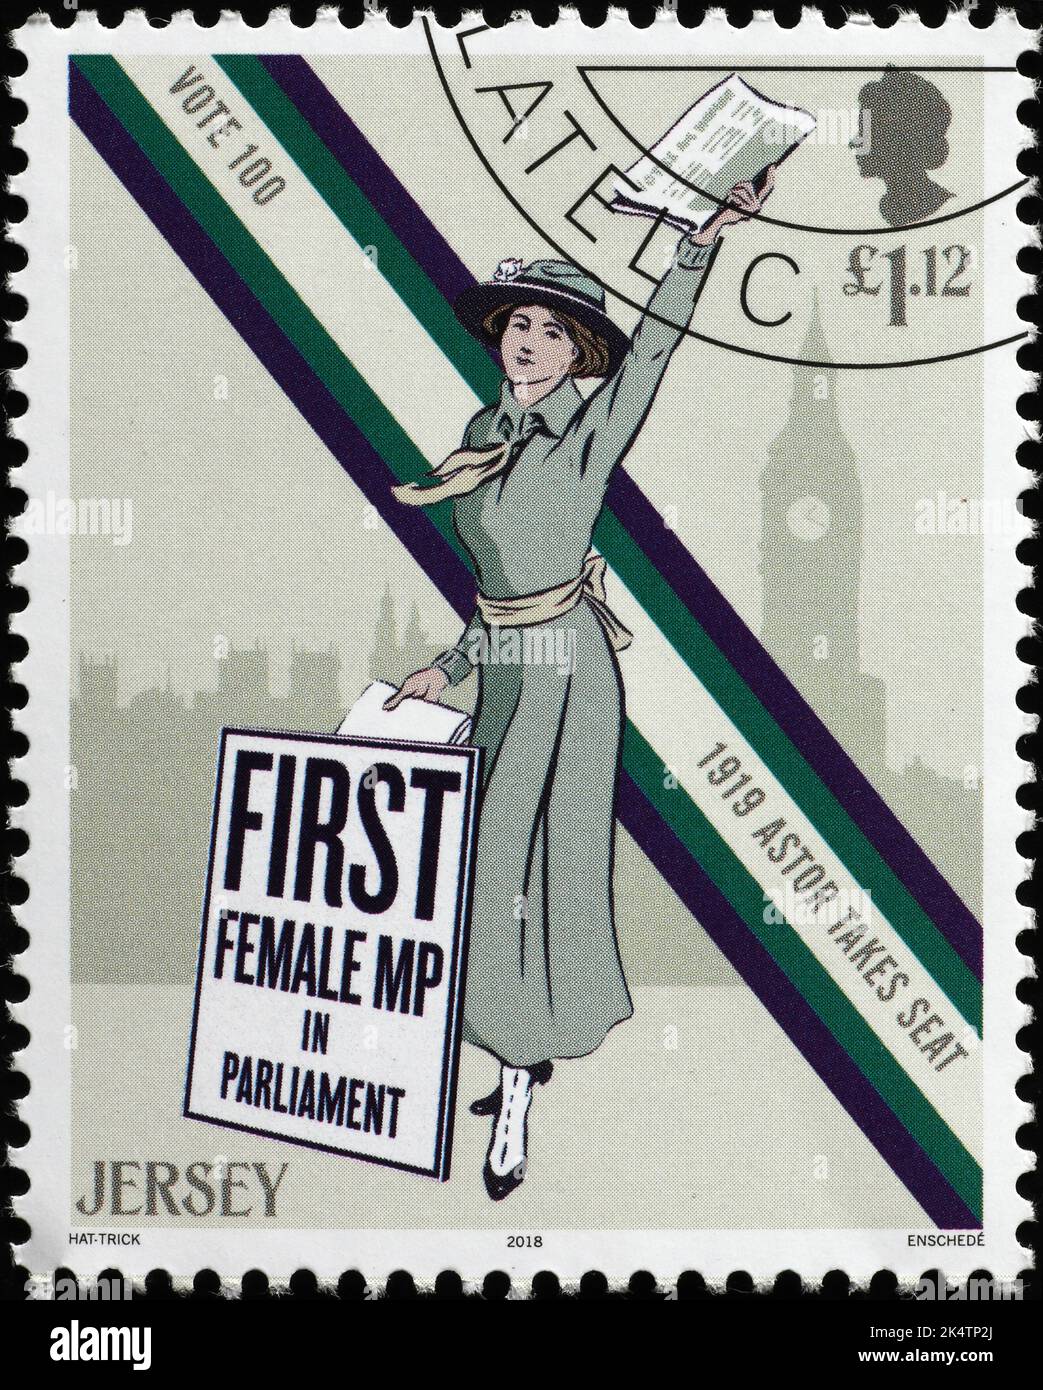 First woman in Parliament on stamp from Jersey Stock Photo